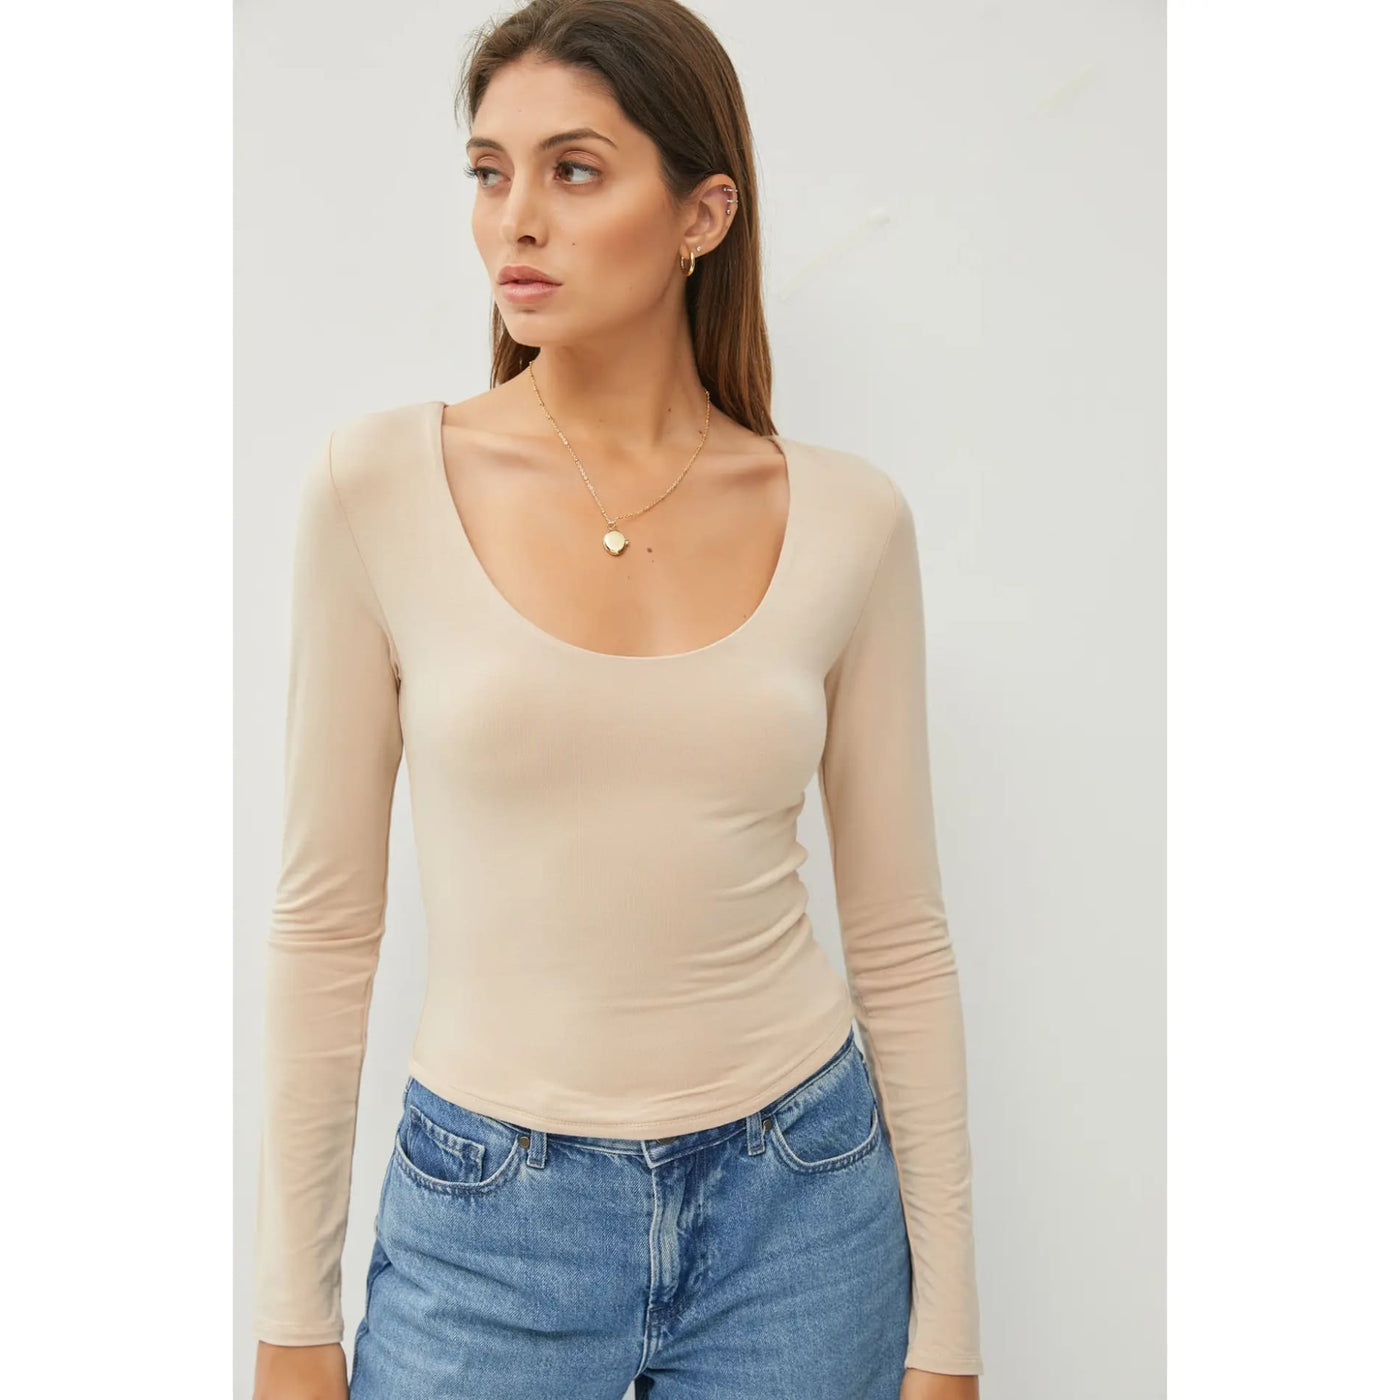 Everyday Basic Long Sleeve Top - S / Light Taupe - 120 Long Sleeve Tops